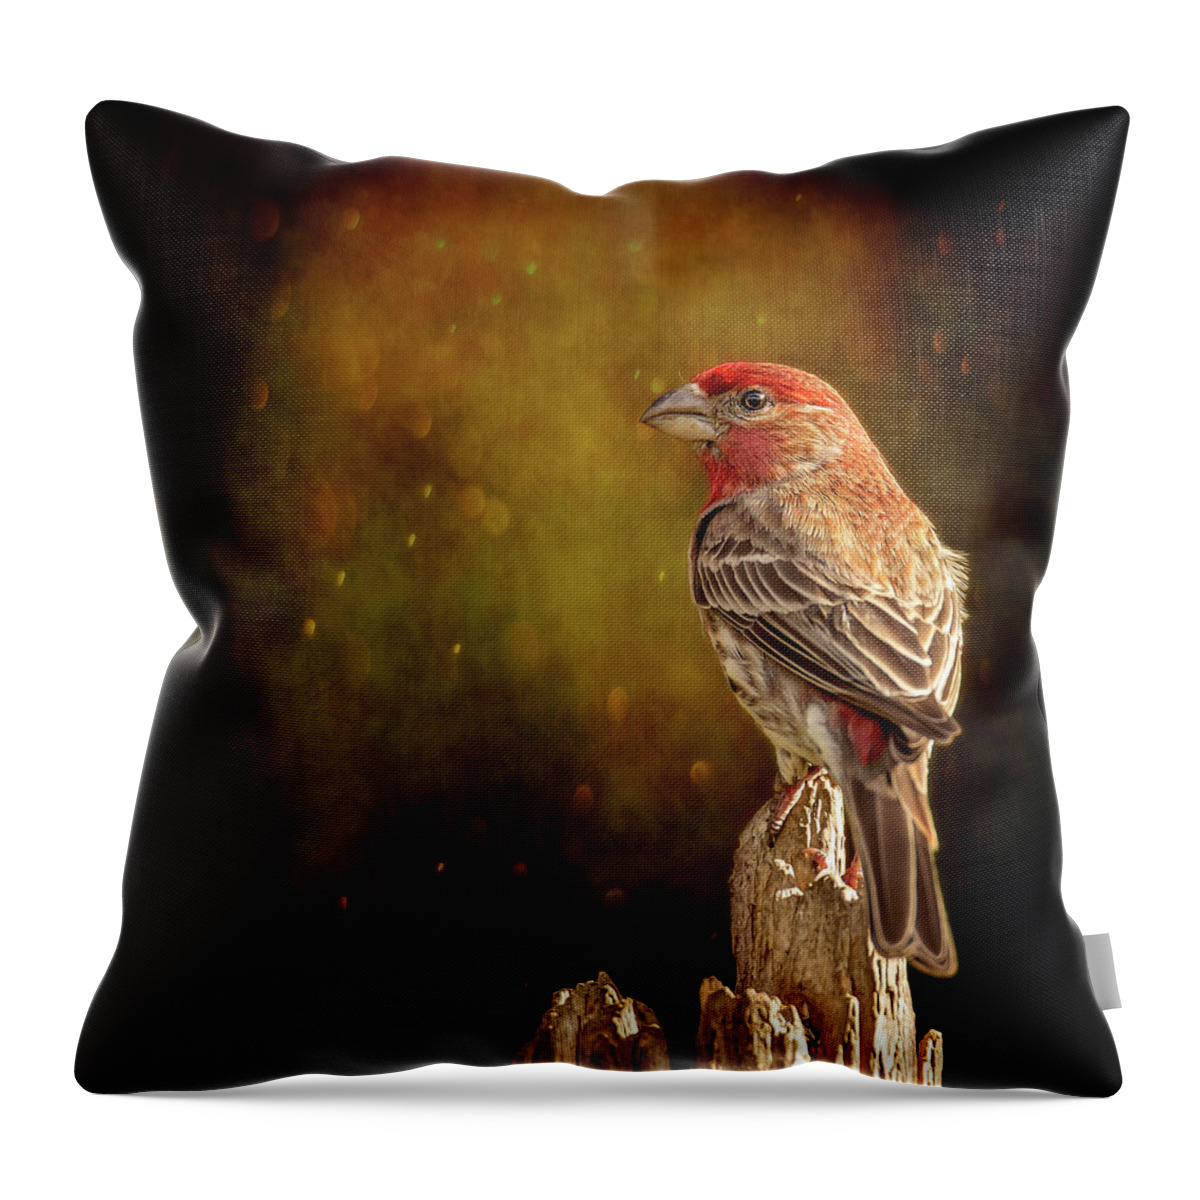 Animal Throw Pillow featuring the photograph Finch From The Back by Bill and Linda Tiepelman